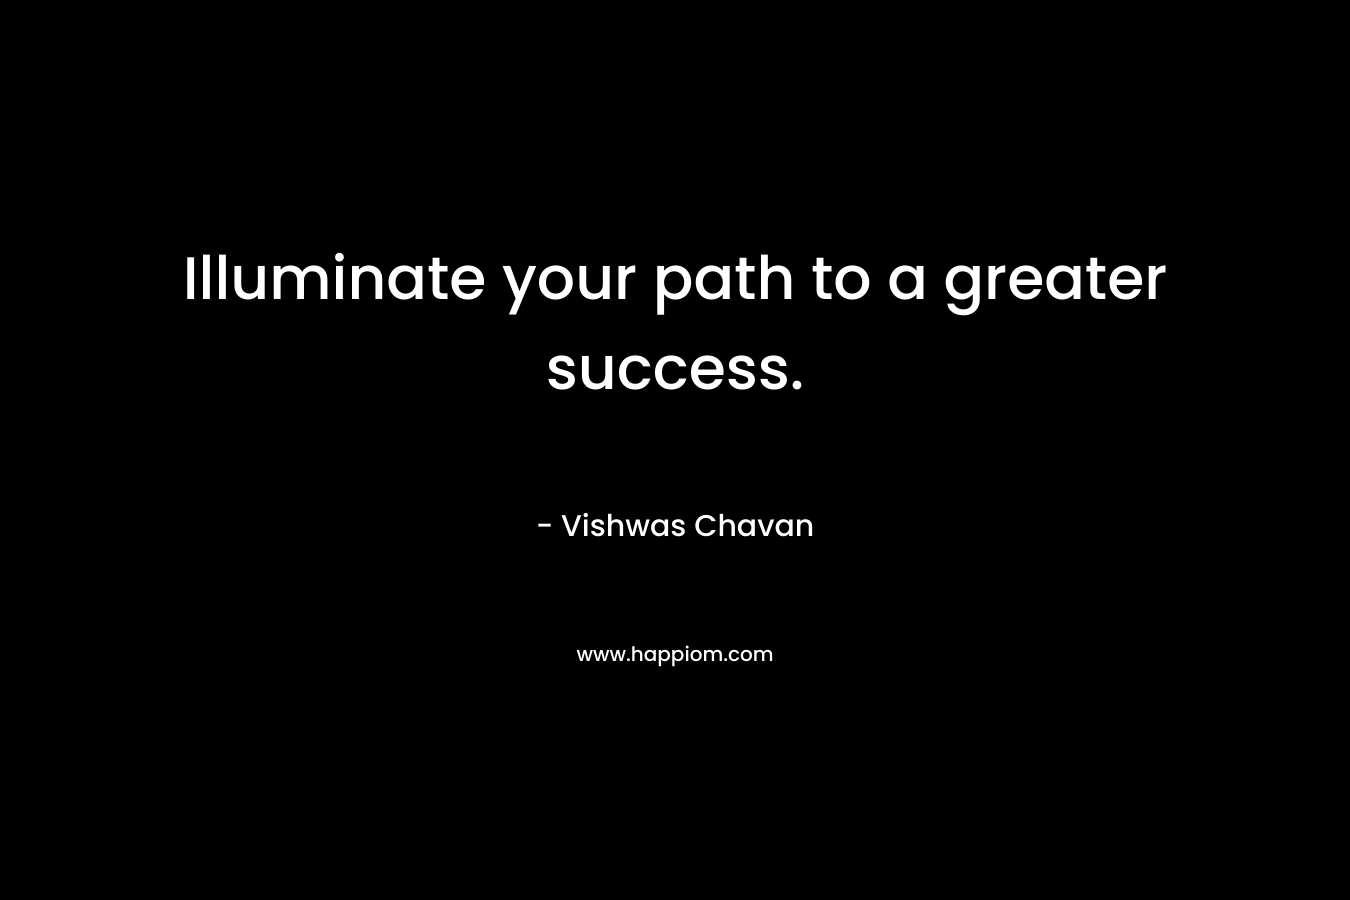 Illuminate your path to a greater success. – Vishwas Chavan